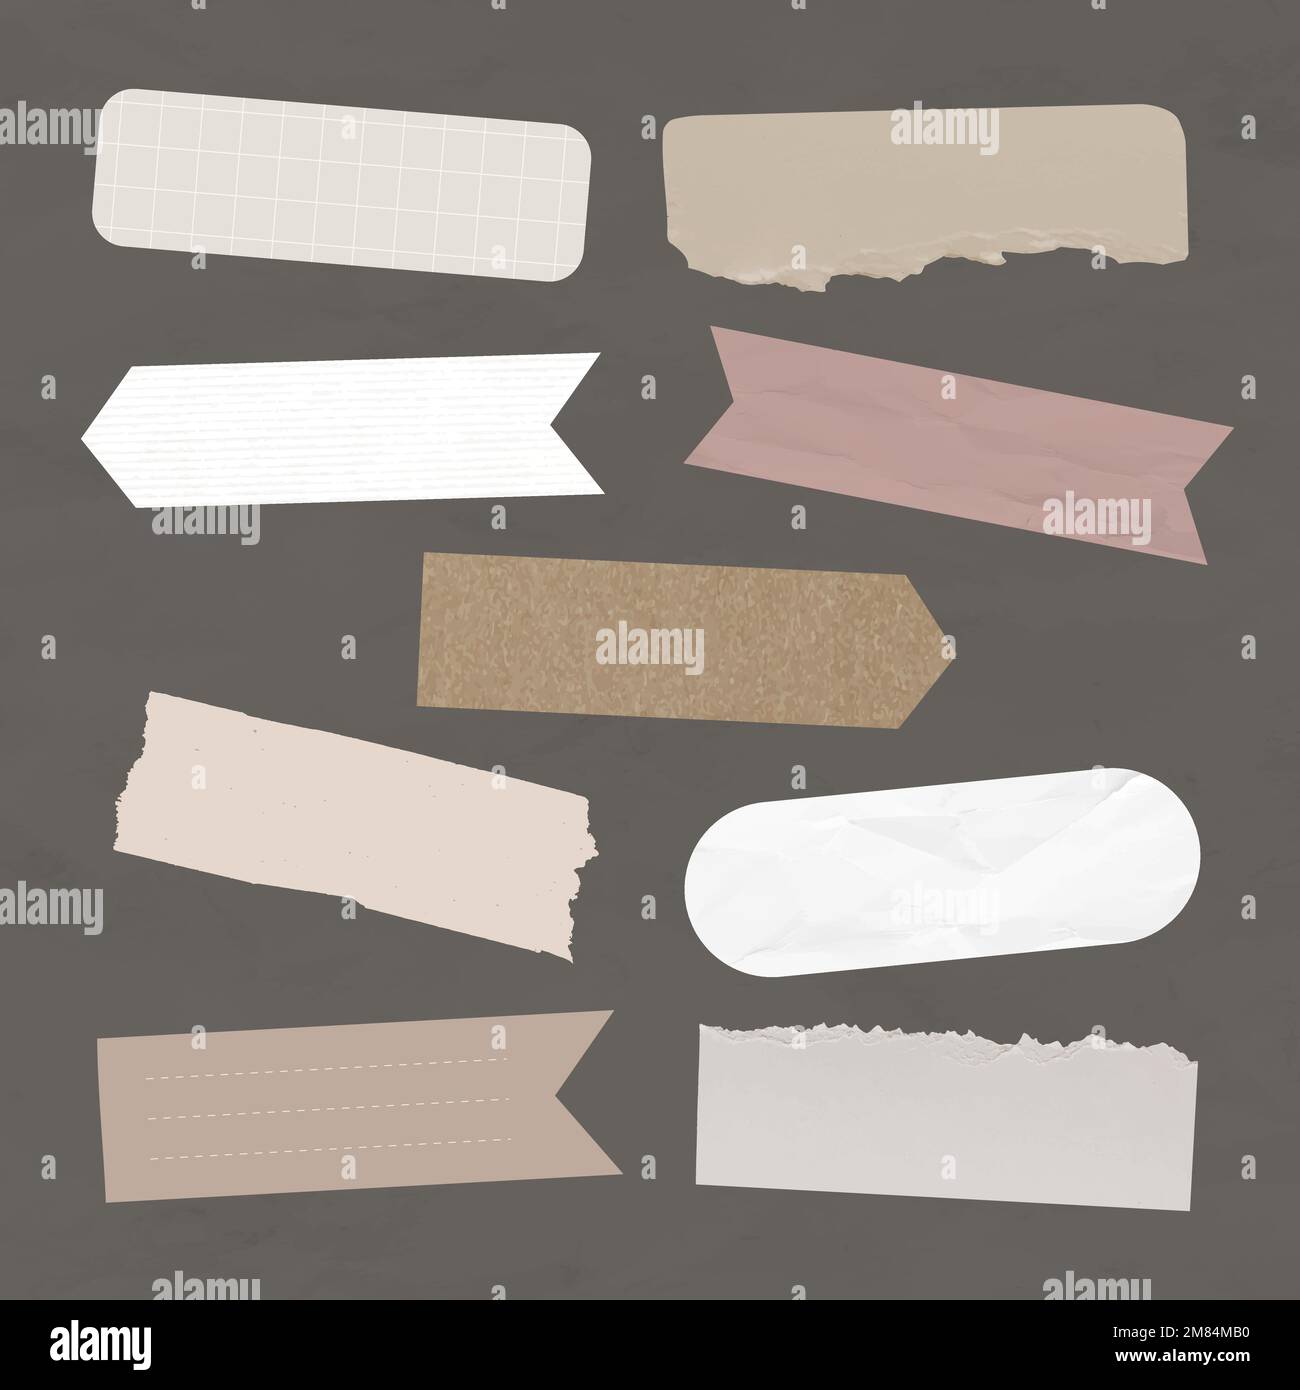 Washi tape clipart brown stationery collage Vector Image